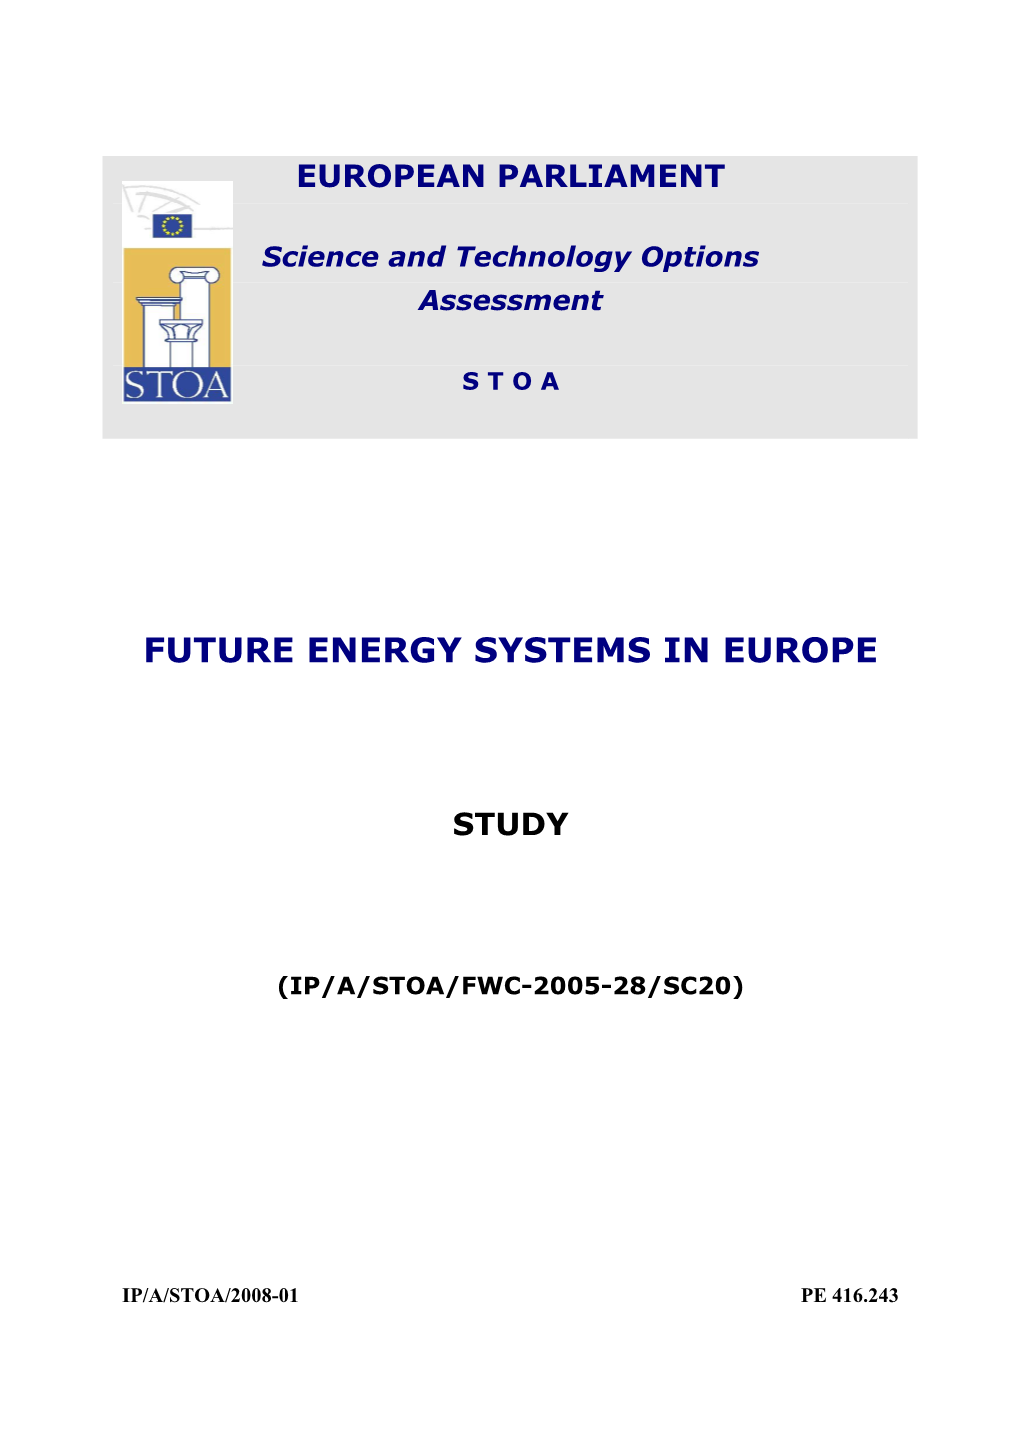 Future Energy Systems in Europe